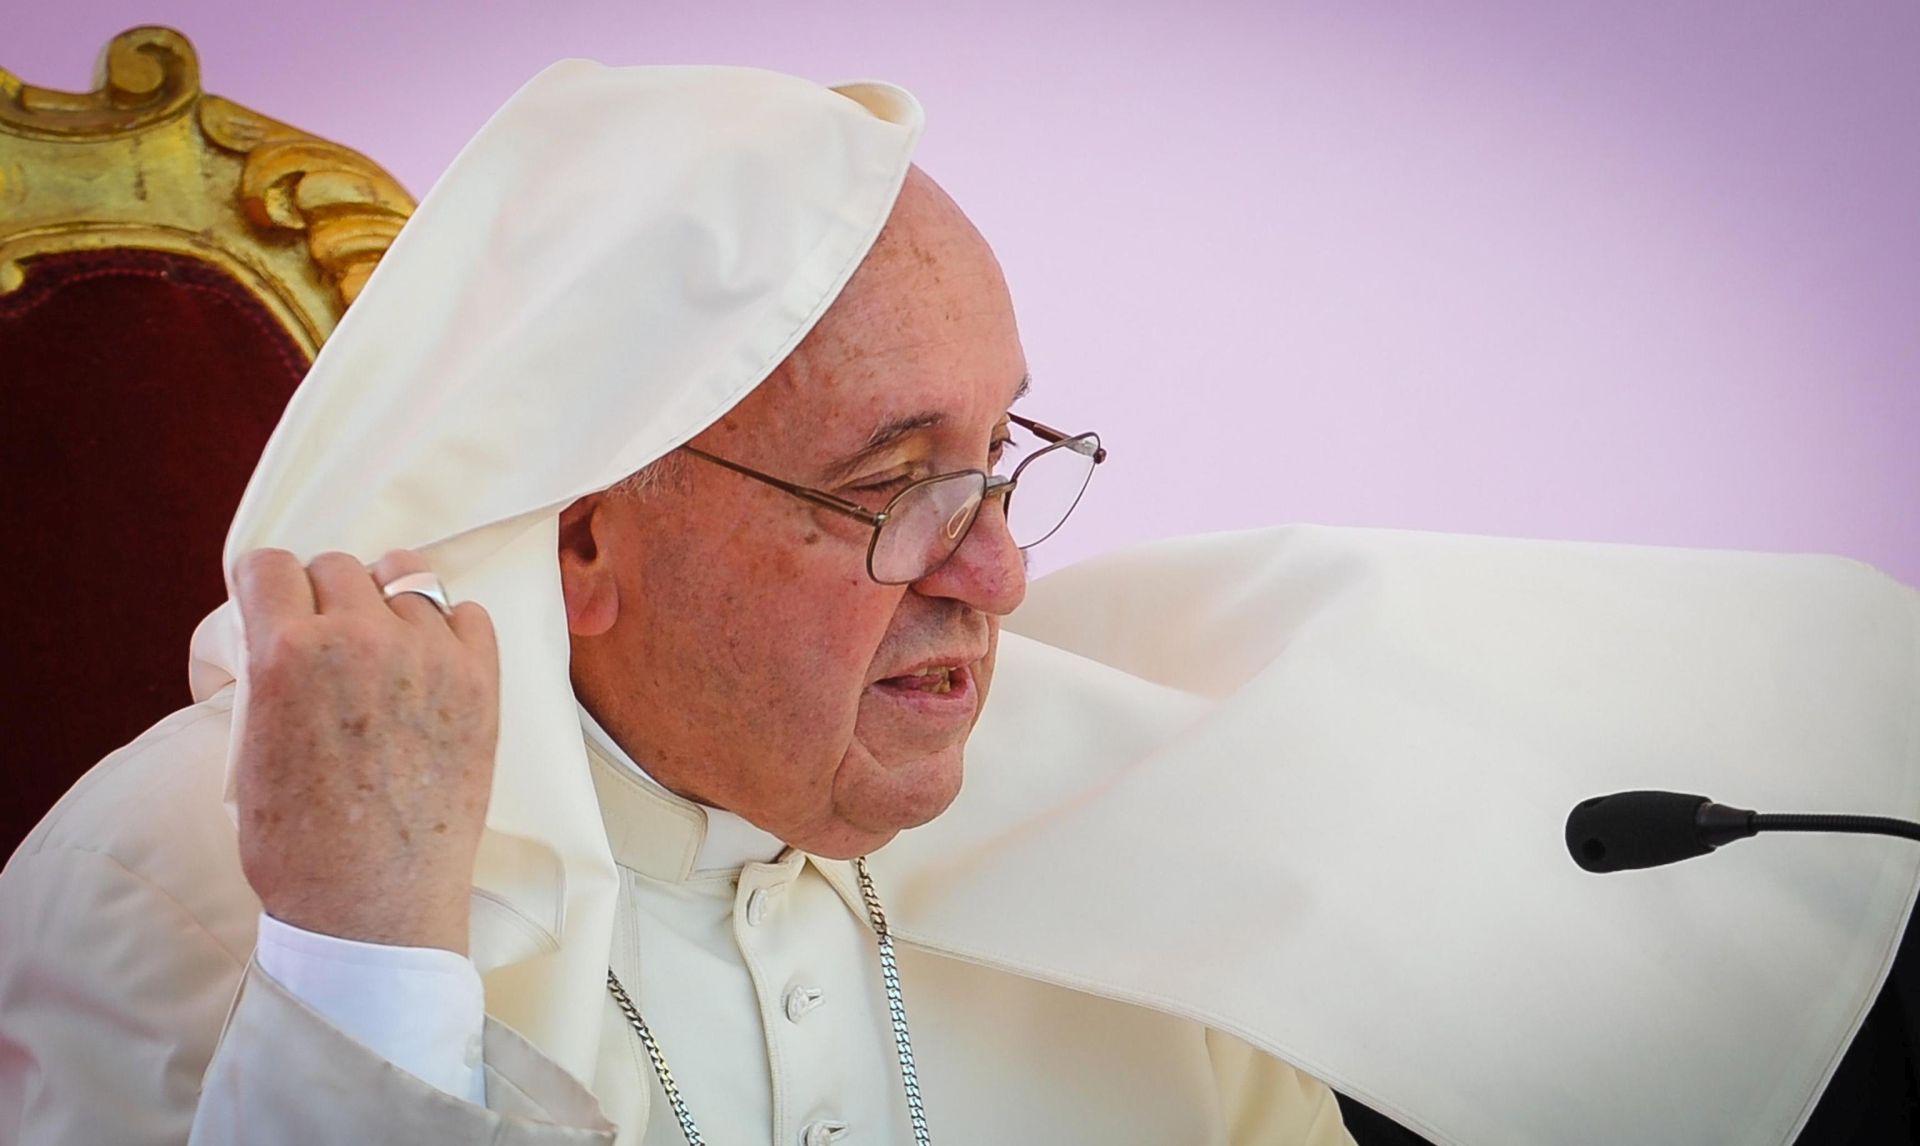 epa07663172 Pope Francis attends the conference 'Theology after Veritas Gaudium in the context of the Mediterranean' at the Theological Faculty of Southern Italy, in Naples, Italy, 21 June 2019. Pope Francis is on a one-day visit to the southern Italian city of Naples.  EPA/CESARE ABBATE